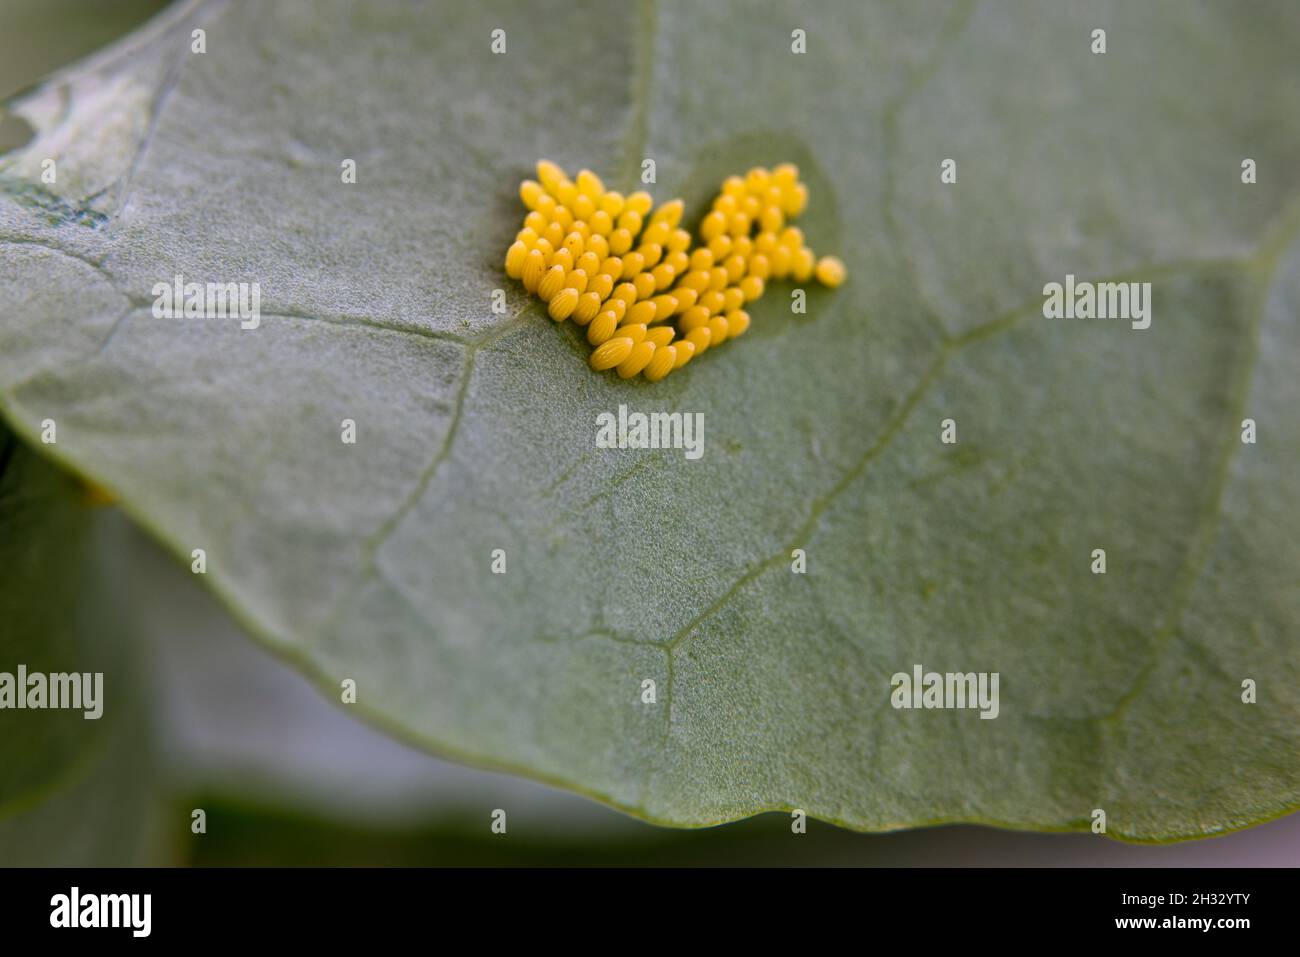 Eggs of the large white cabbage butterfly (Pieris brassicae) on the underside of a brassica leaf. Stock Photo